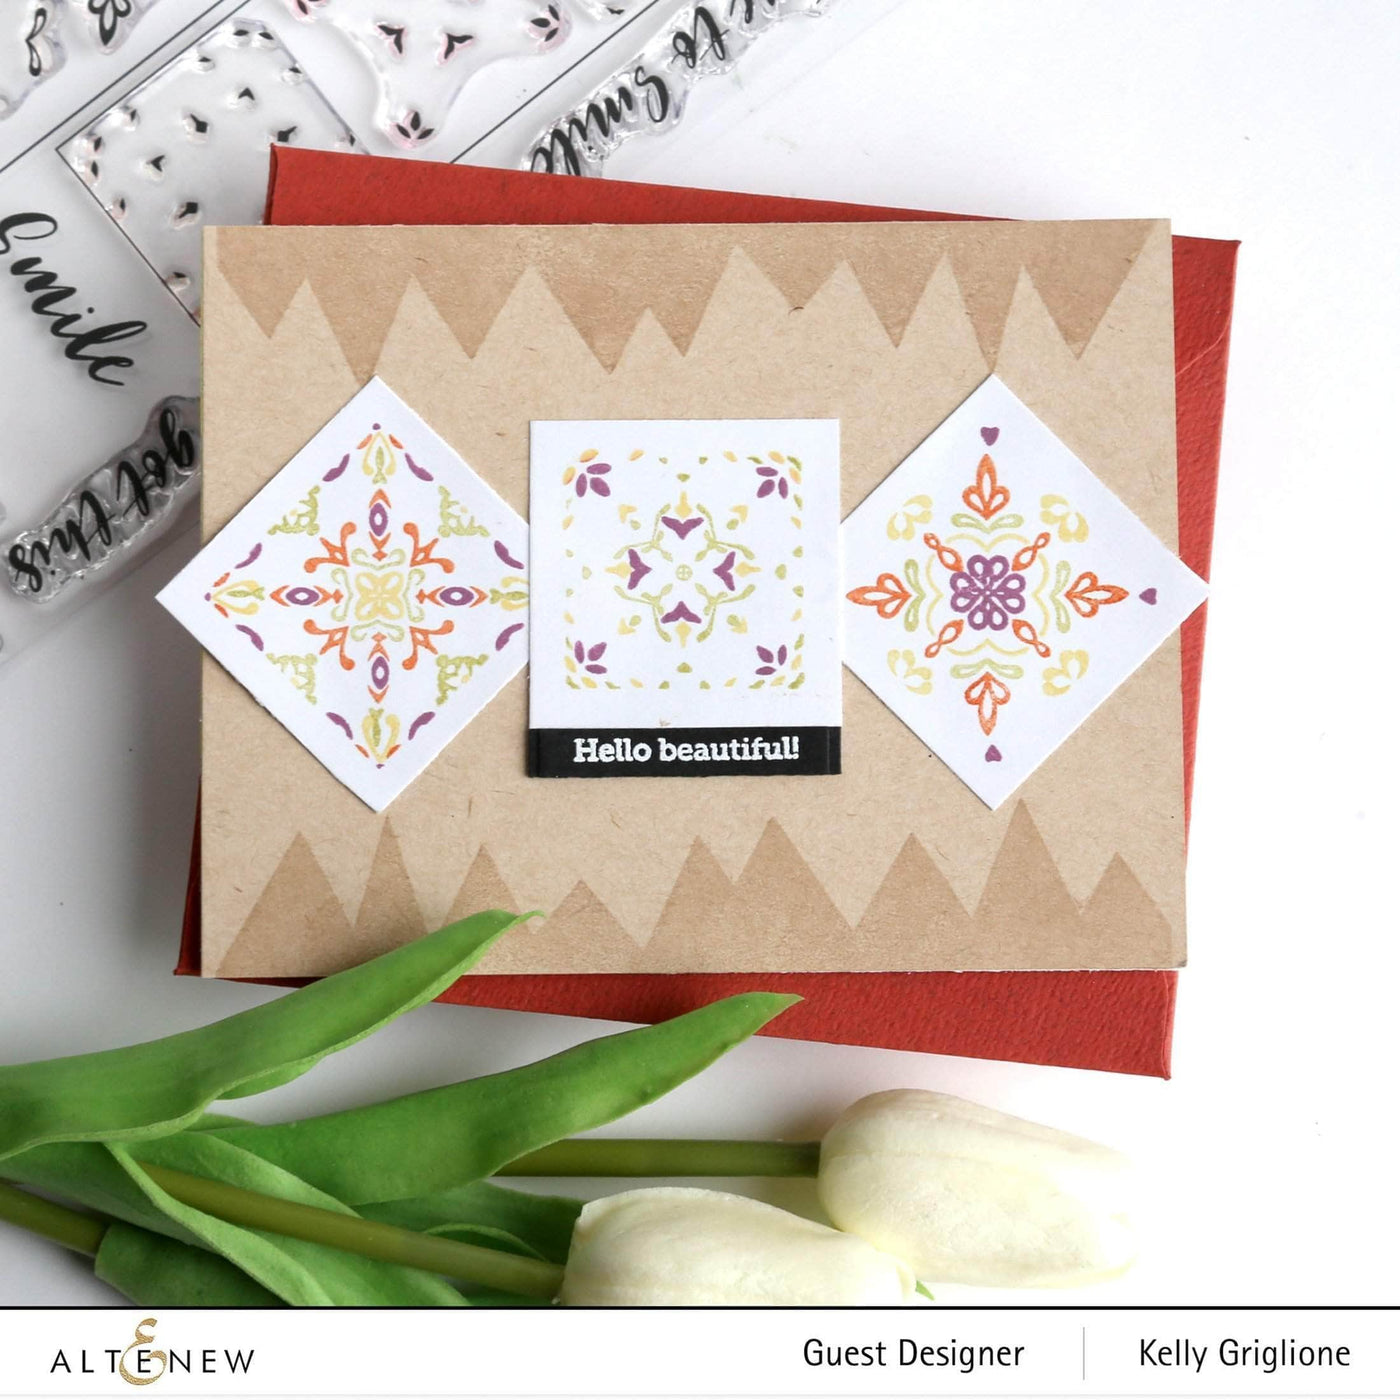 Photocentric Clear Stamps Delicate Tiles Stamp Set